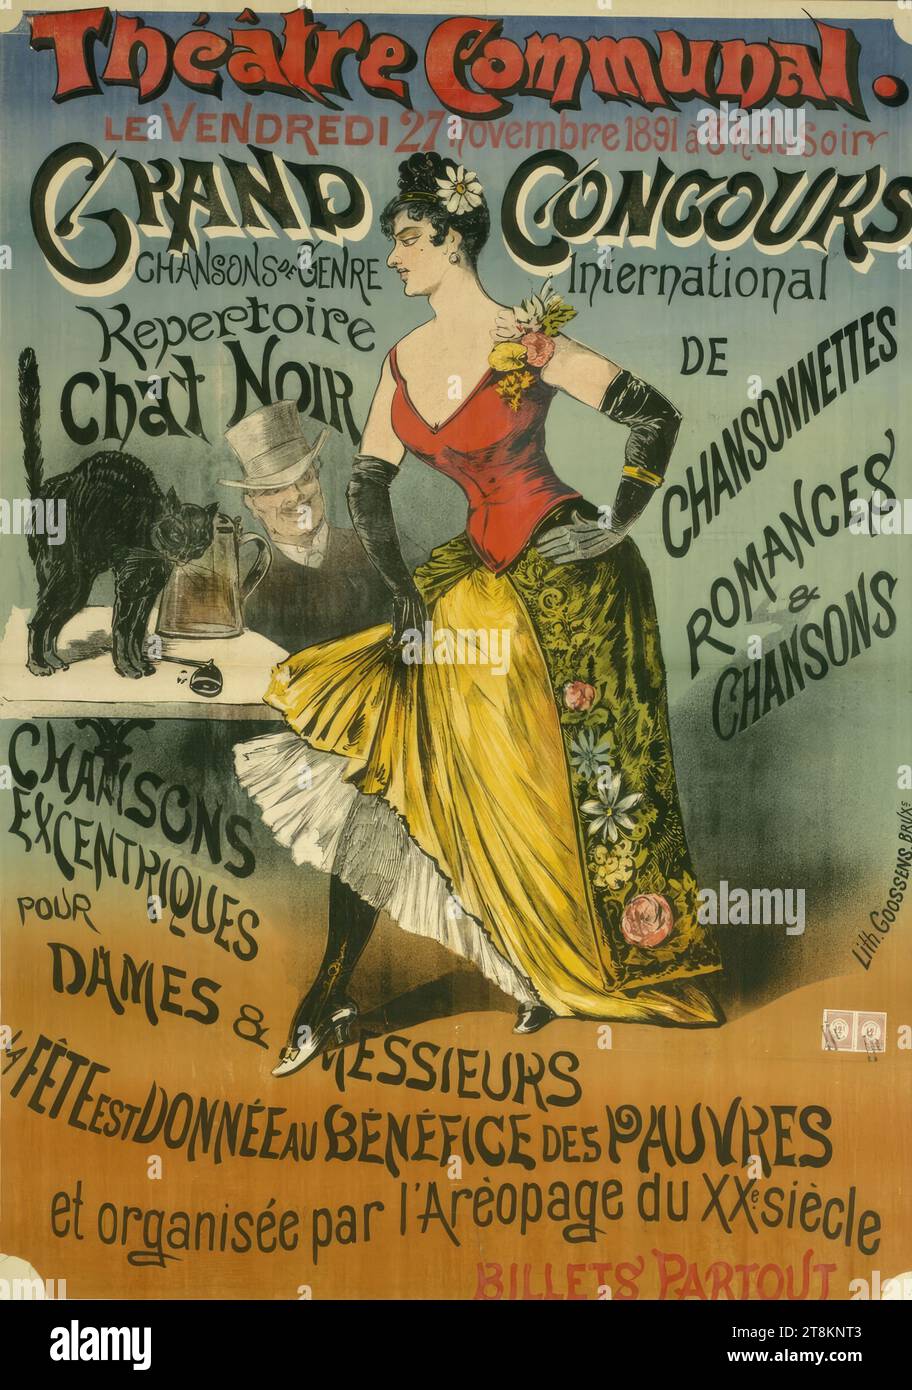 Theater Communal; LE VENDREDI November 27, 1891; GRAND CONCOURS international DE CHANSONNETTES; Repertoire Chat Noir, Anonymous, 1891, print, color lithograph, sheet: 1250 mm x 900 mm, right. Stamp stamps with stamp, Goossens Stock Photo